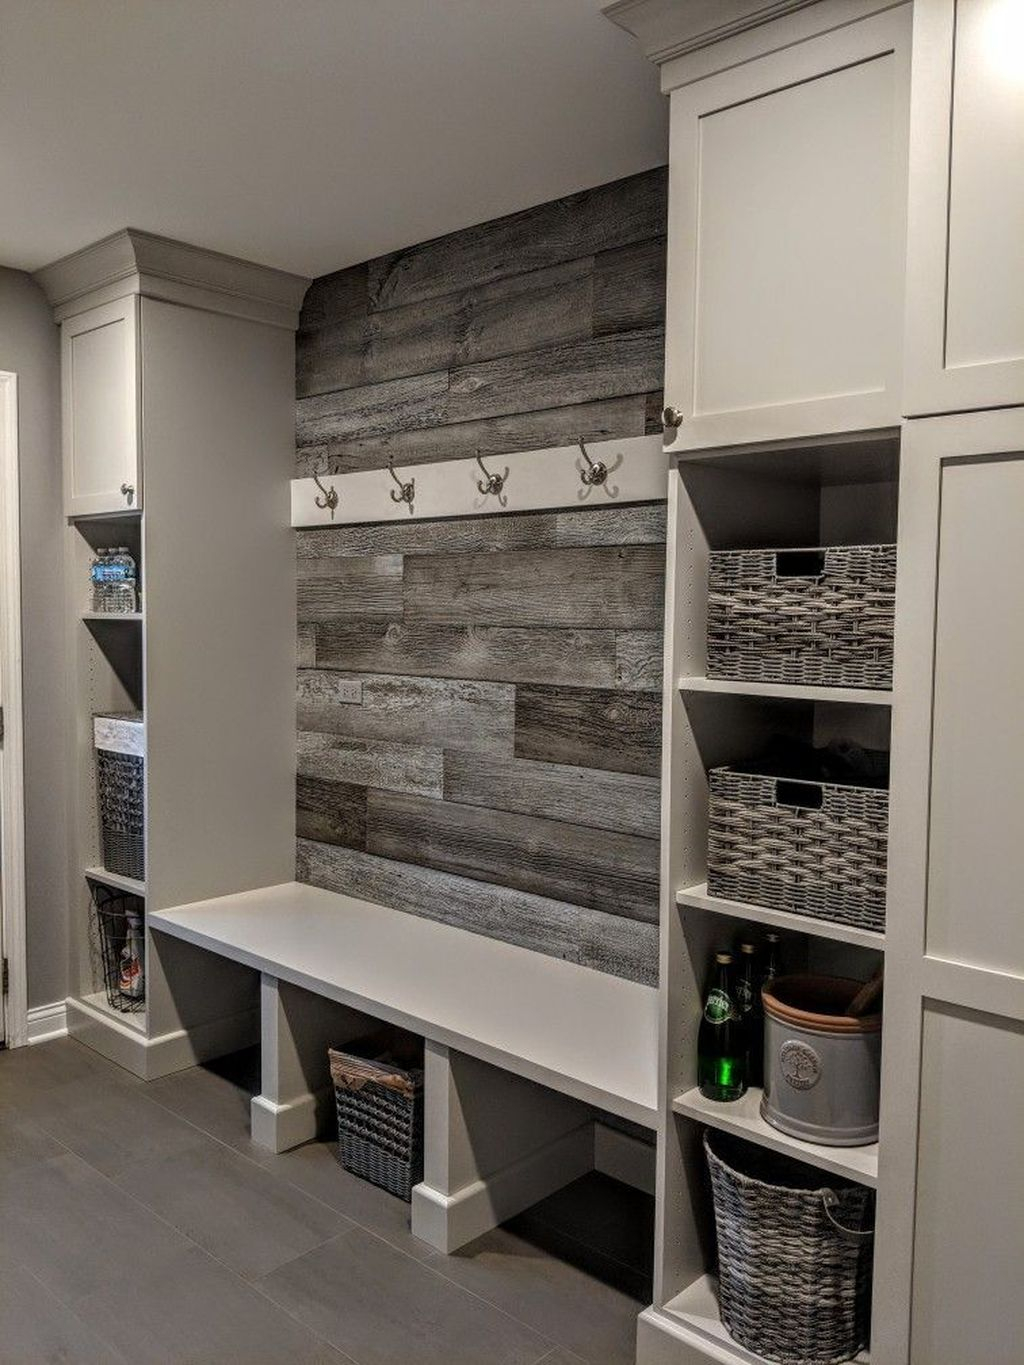 Favored Laundry Room Organization Ideas To Try 09